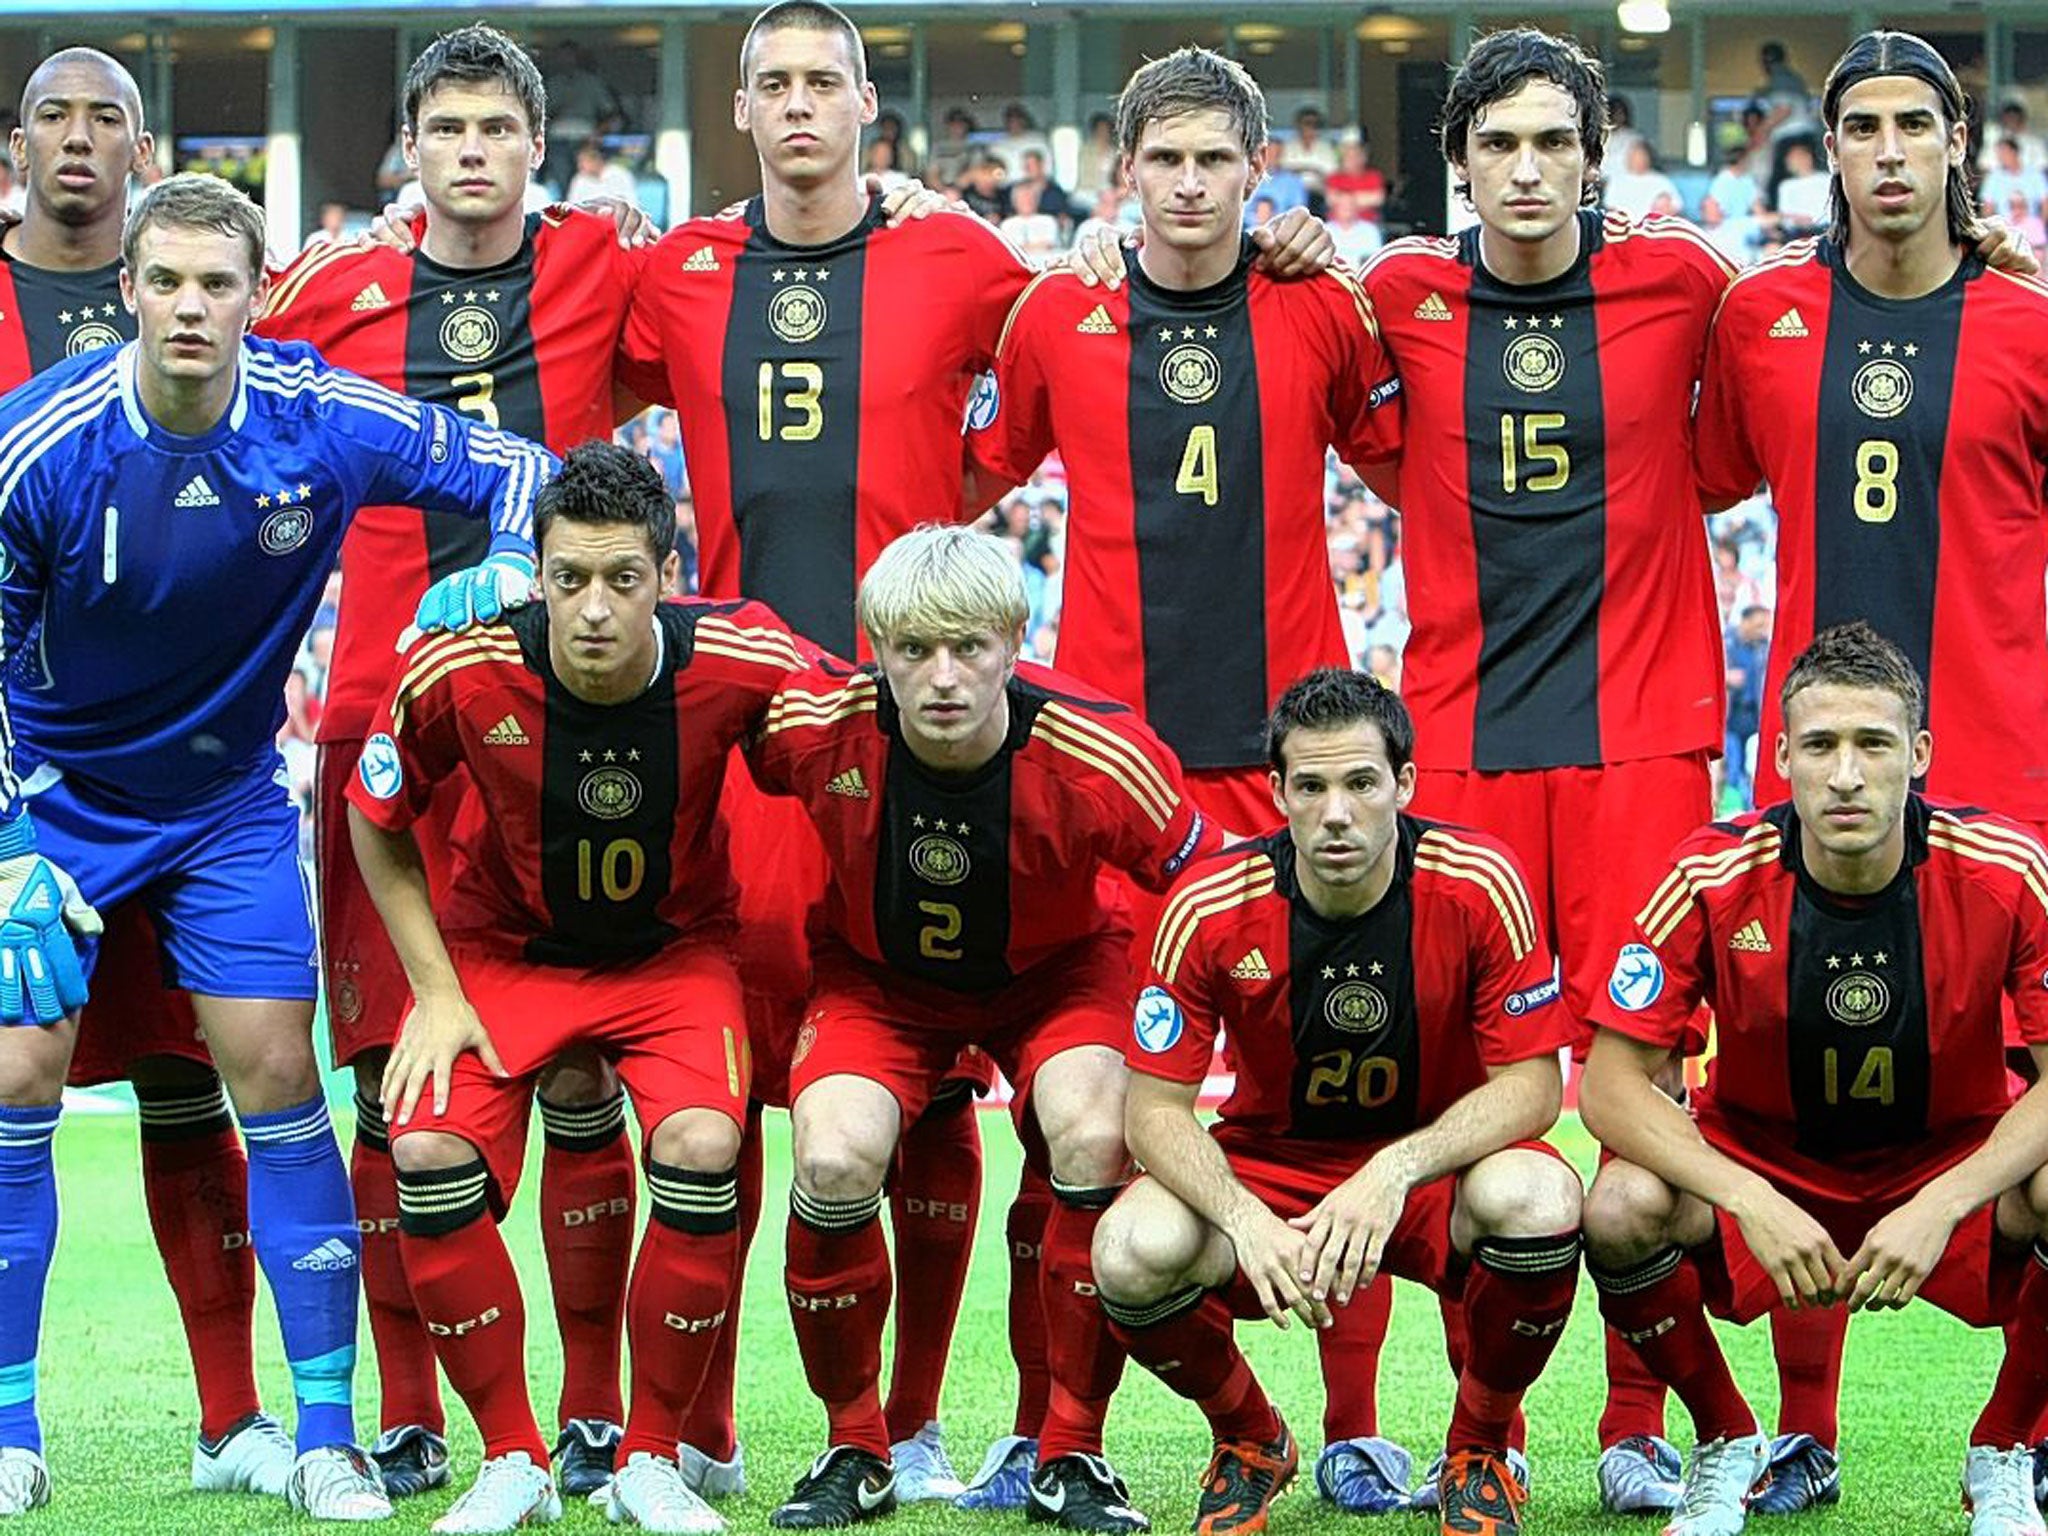 Jérôme Boateng (top row, far left), Benedikt Höwedes (No 4), Mats Hummels (15) Sami Khedira (8), Manuel Neuer (1) and Mesut Özil (10) line up in the Germany Under-21 side to face England in Malmo five years ago